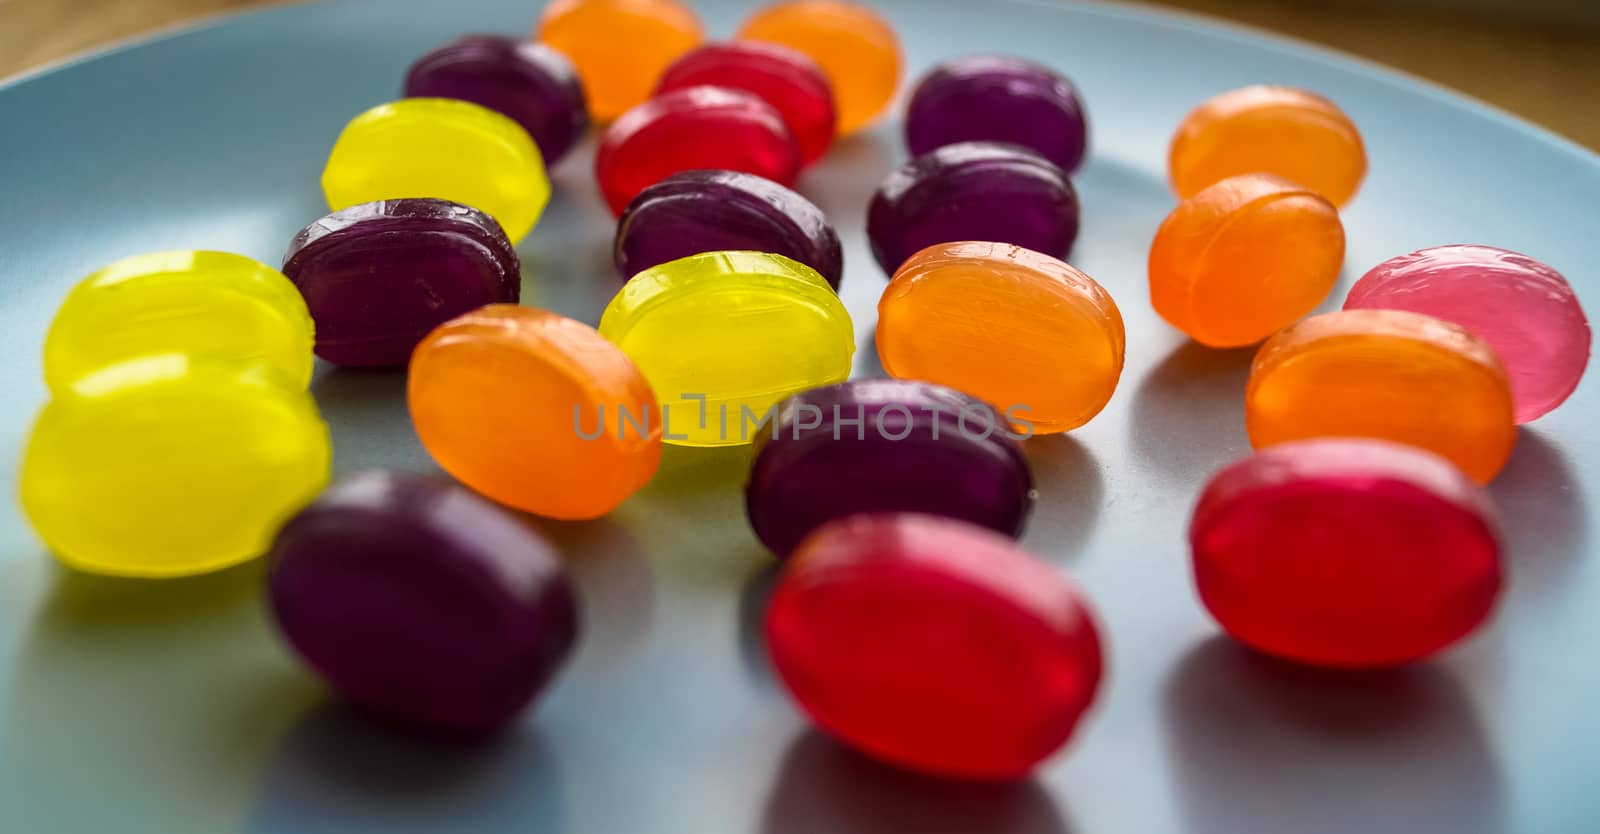 colored candy lollipops laid out on the plate by Oleczka11